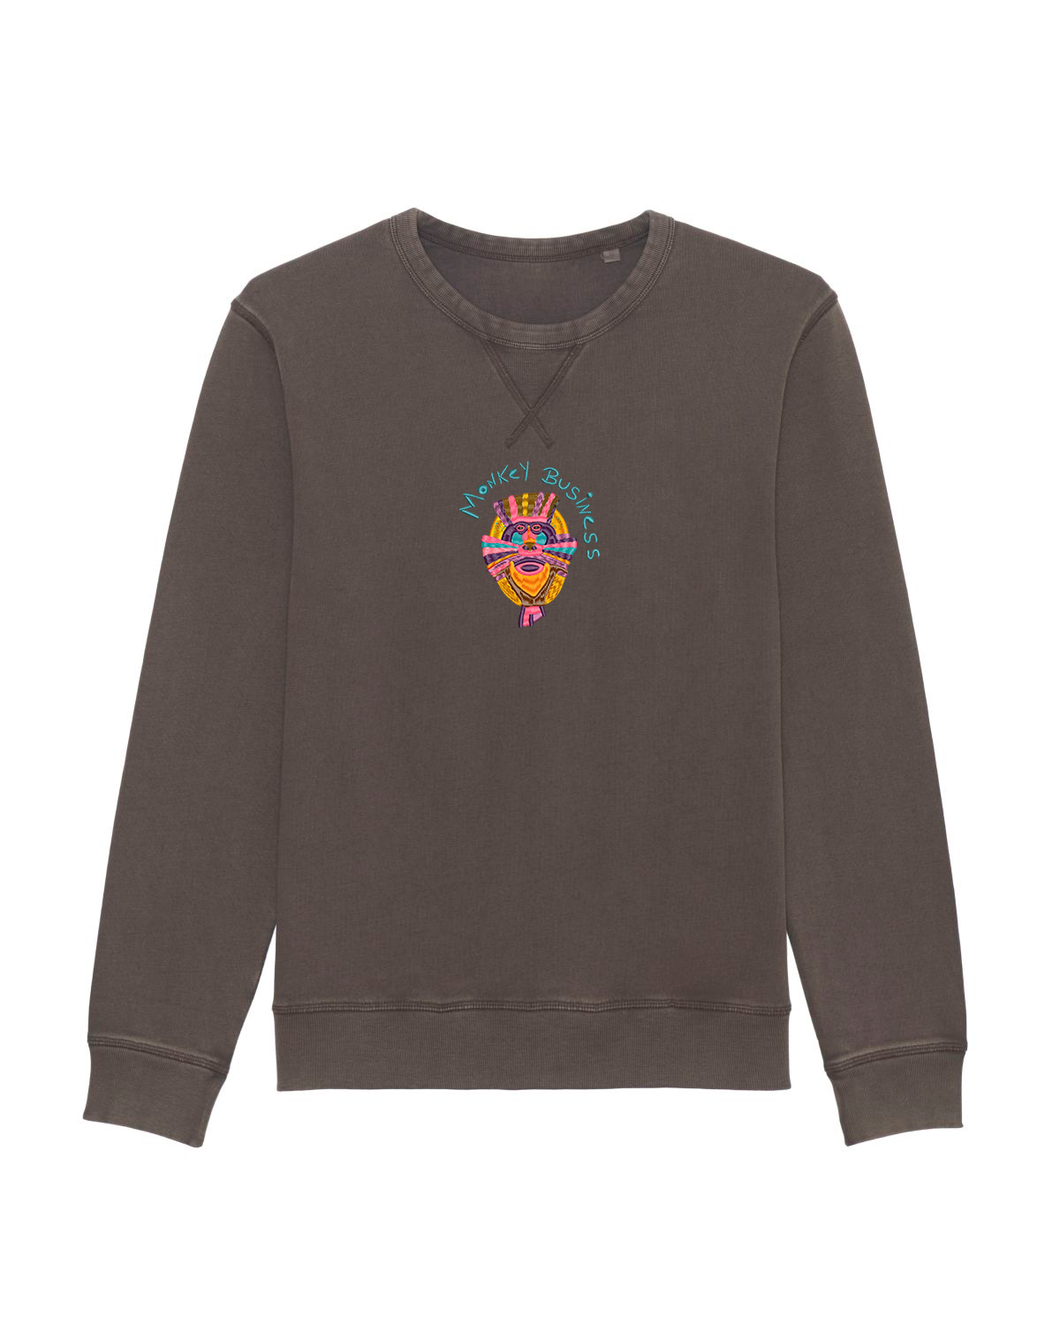 MONKEY BUSINESS 🐵- Embroidered UNISEX CREW NECK garment dyed sweatshirt -OUTLET🔴